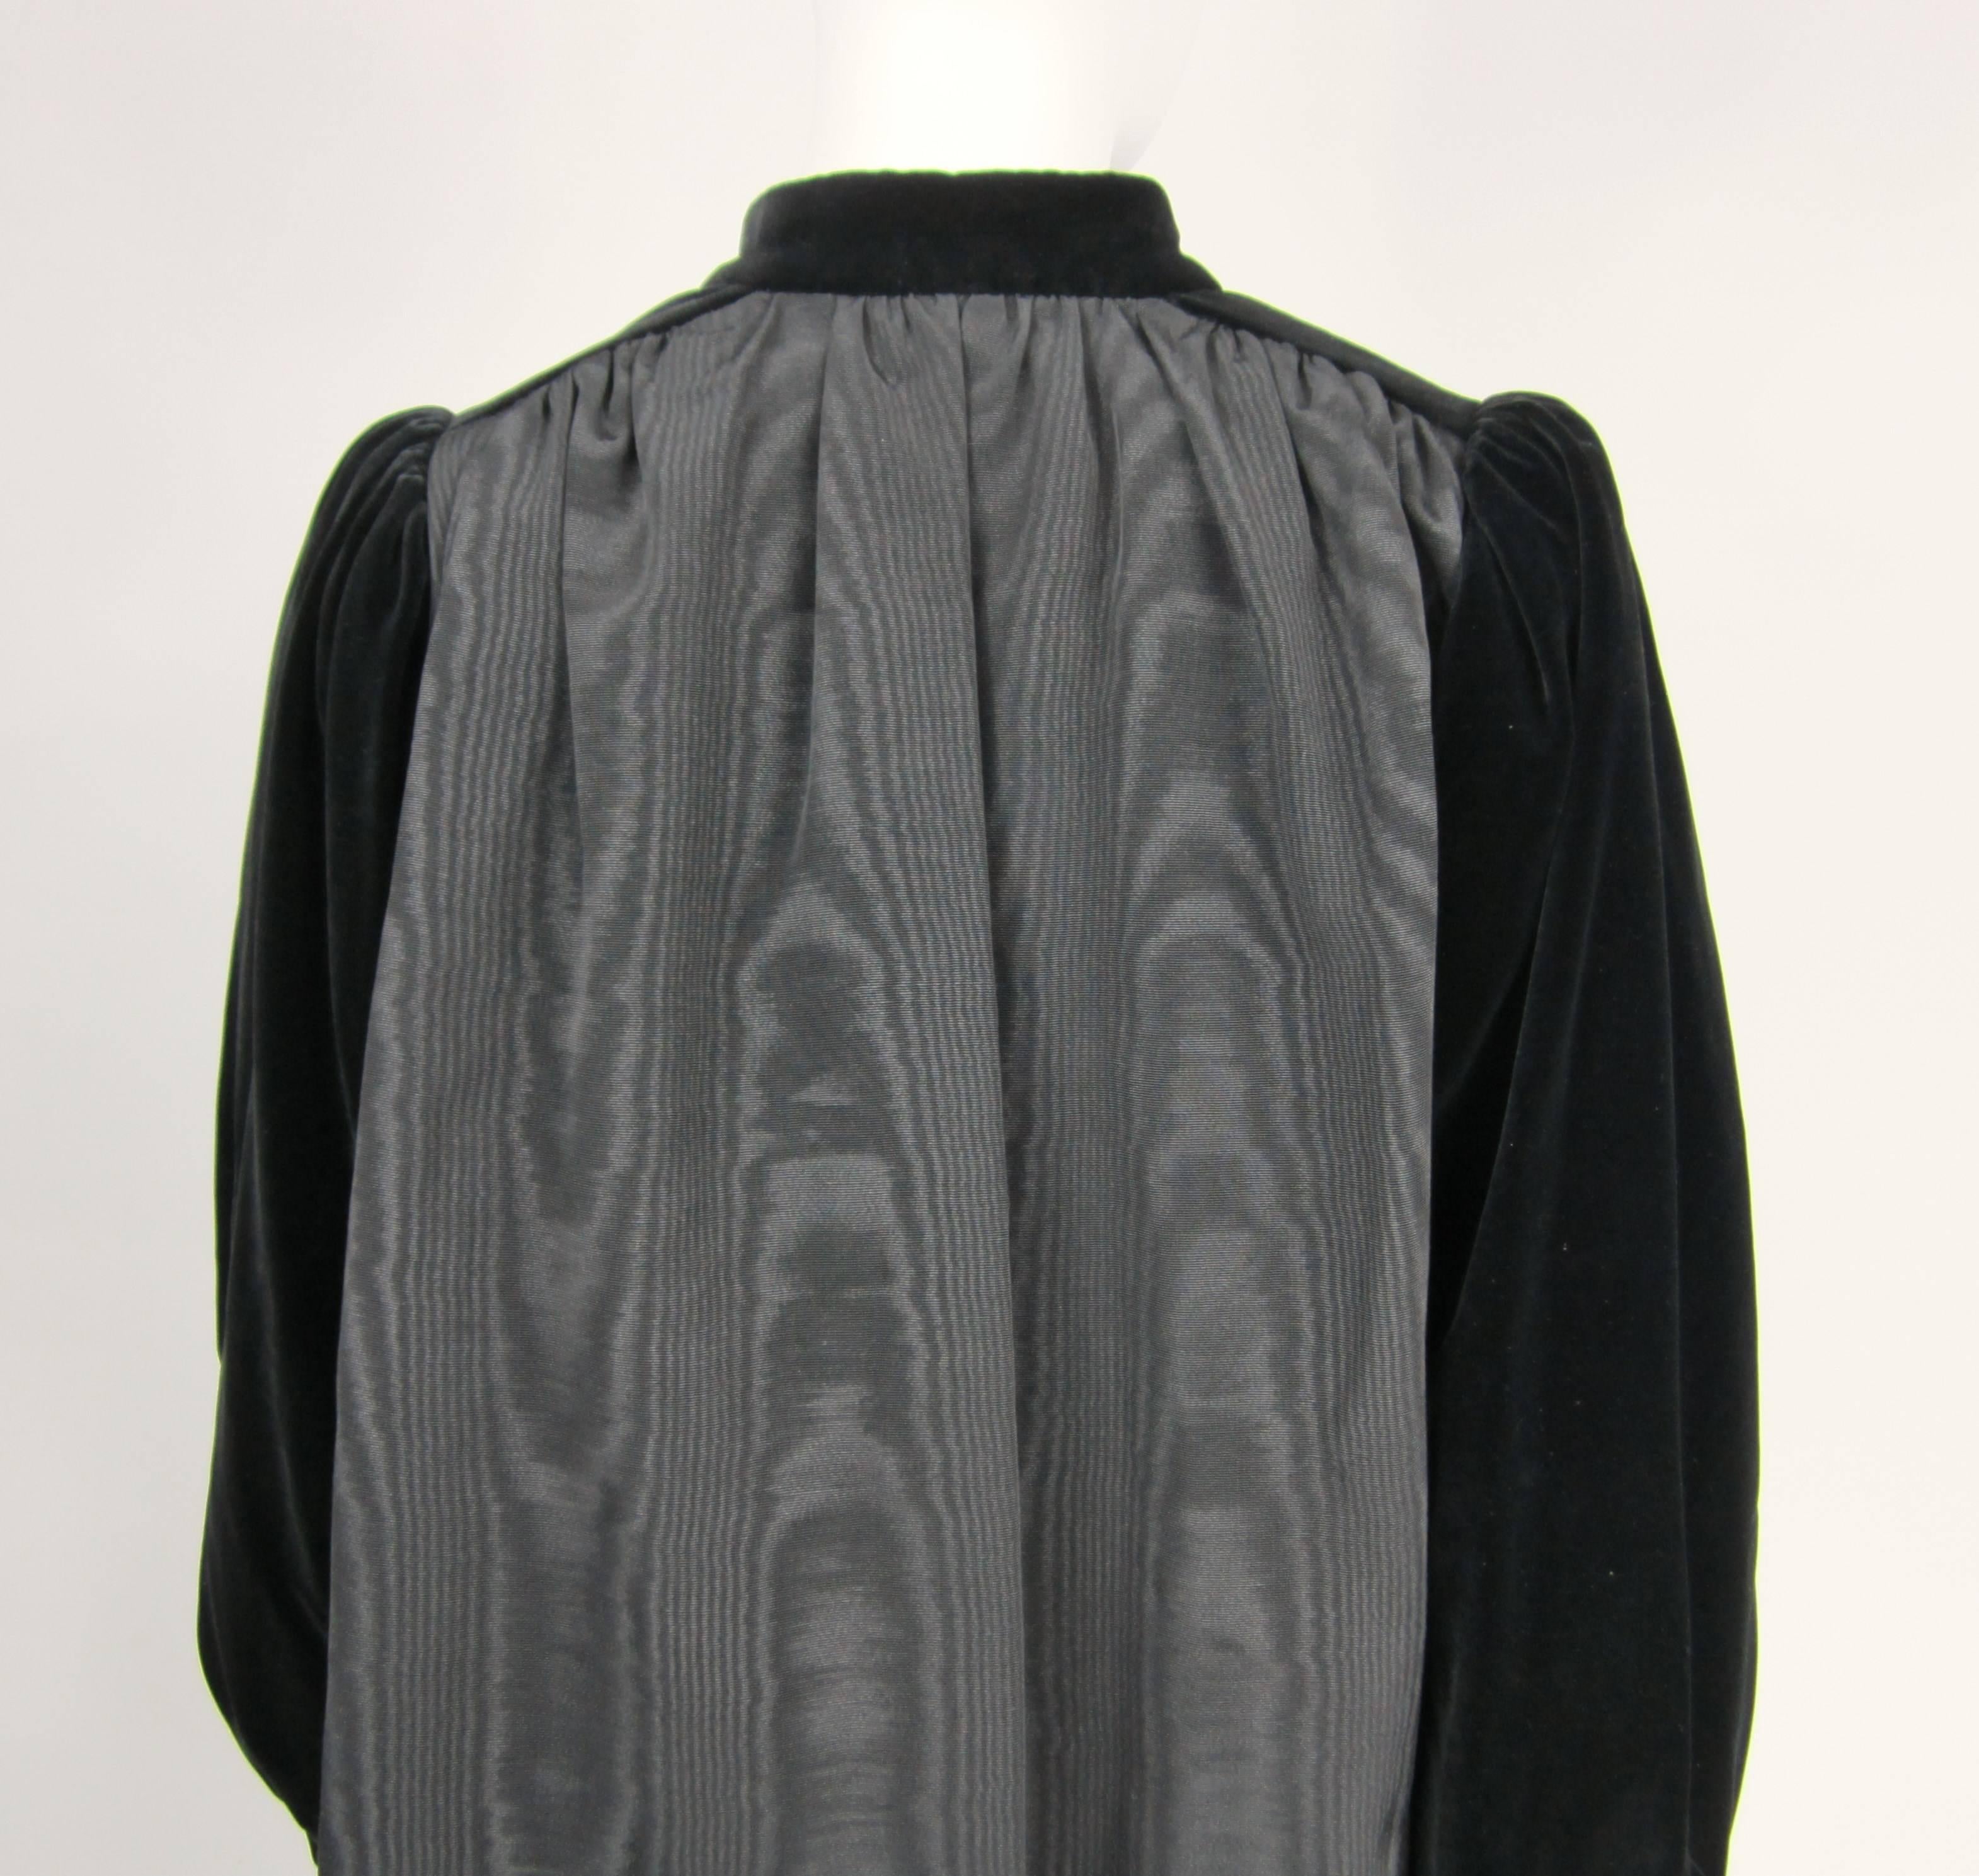 Yves Saint Laurent Black Velvet Russian Collection 1976 Jacket  In Excellent Condition For Sale In Wallkill, NY